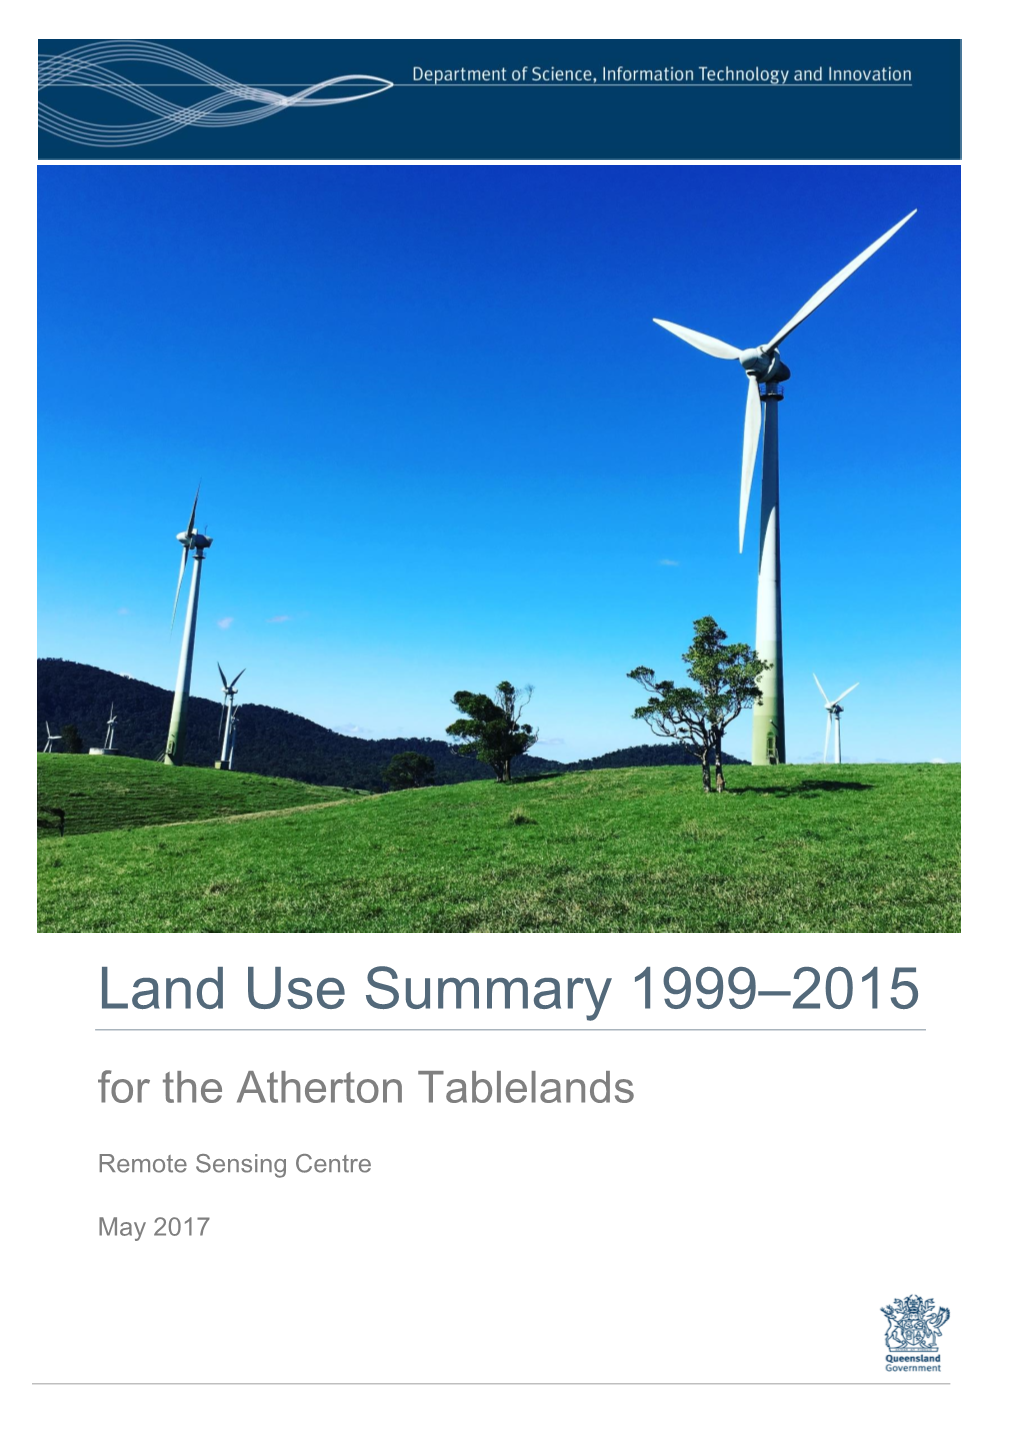 Land Use Summary 1999–2015 for the Atherton Tablelands